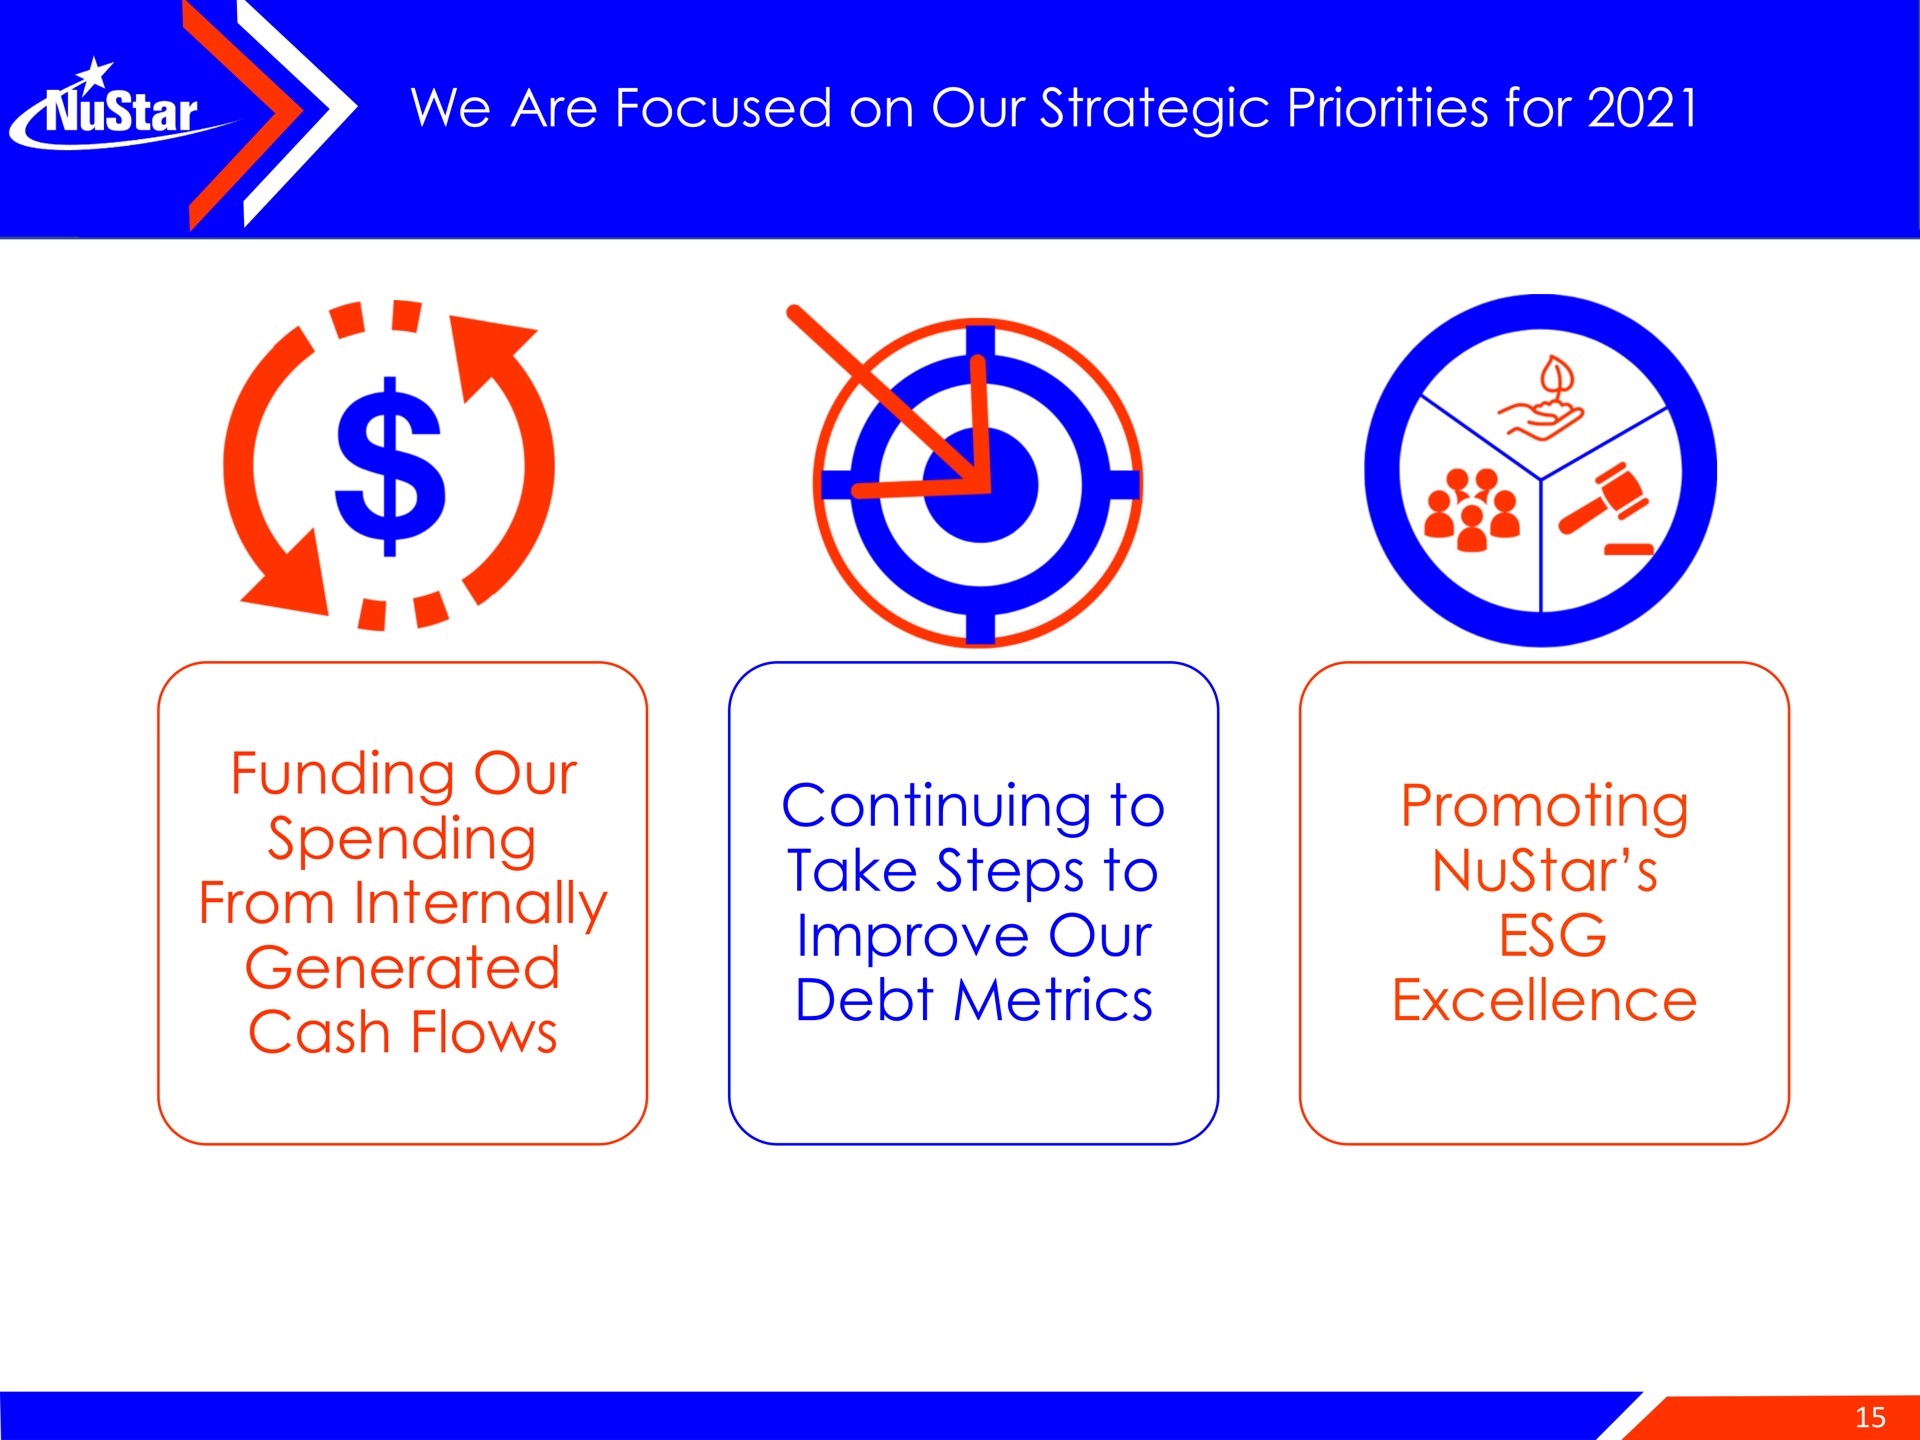 we are focused on our strategic priorities for funding our spending from internally generated cash flows continuing to take steps to improve our debt metrics promoting excellence | NuStar Energy